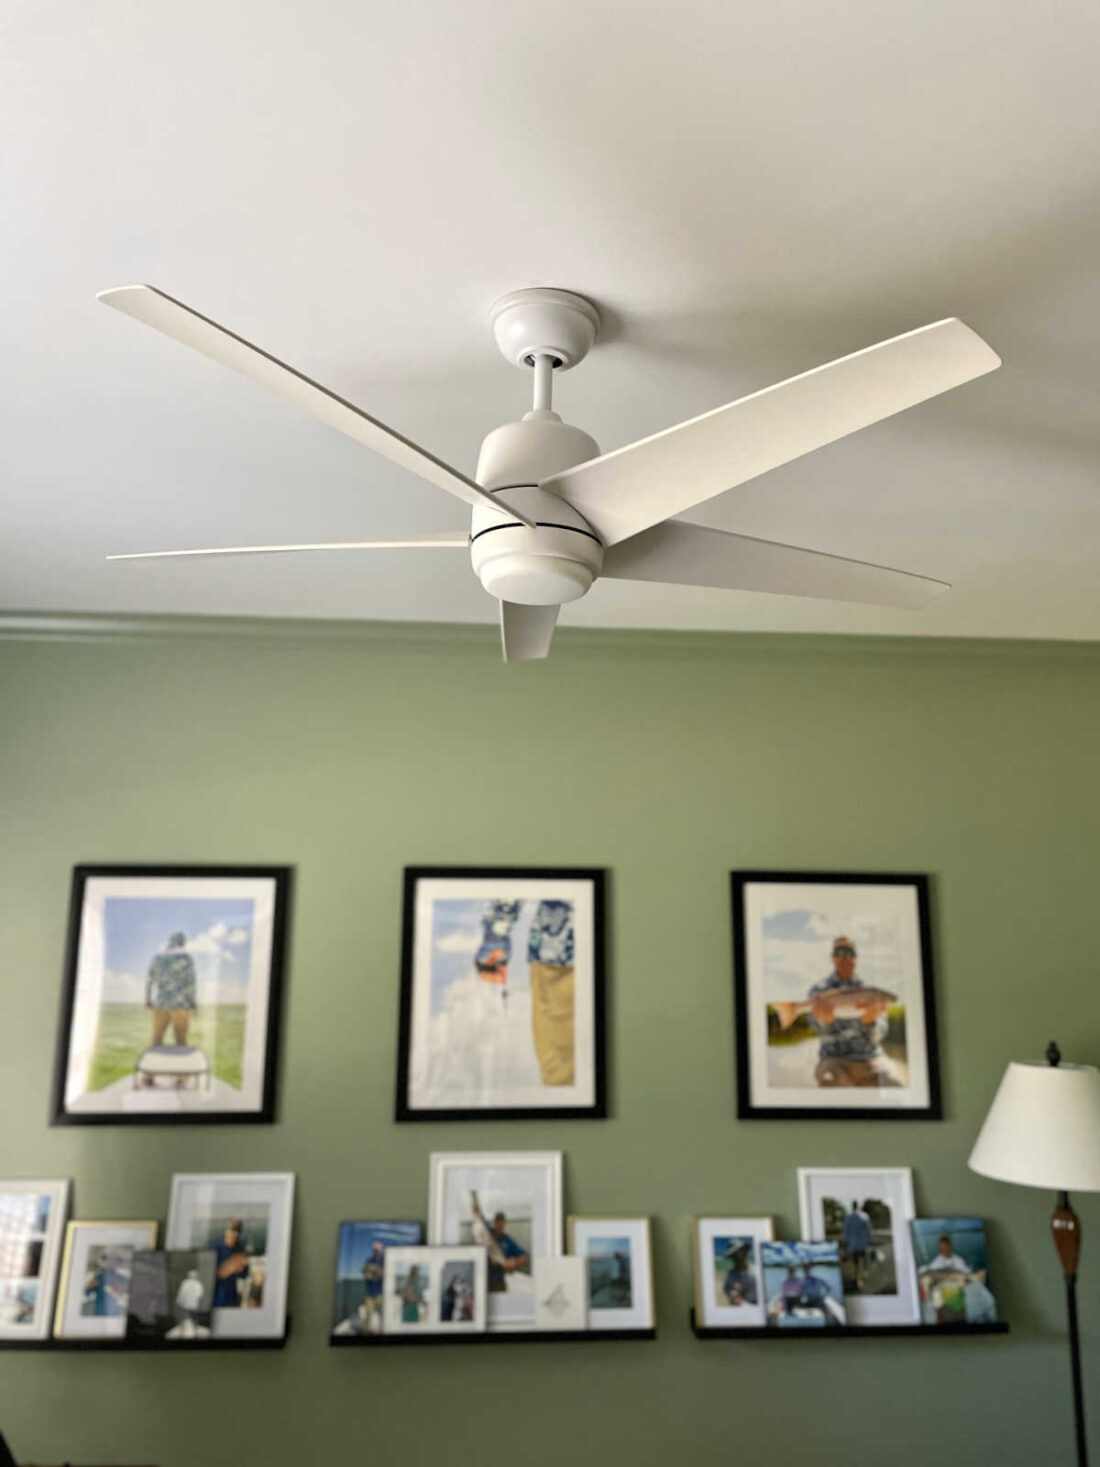 Home office photo wall decor with coastal plain paint color on walls and white ceiling fan